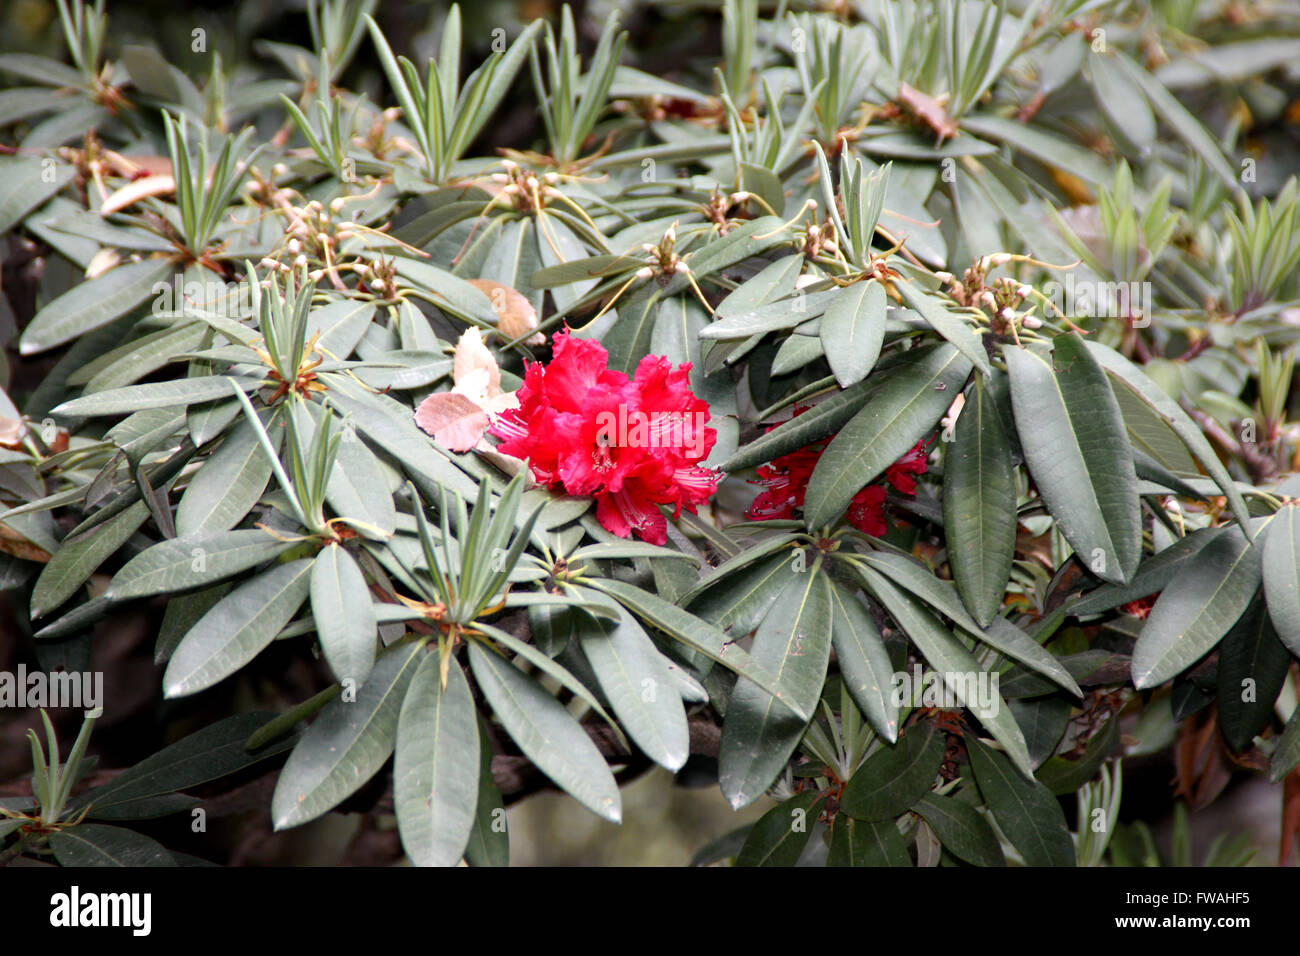 Rhododendron arboreum, Tree Rhododendron, evergreen shrub or small tree with bright red flowers in clusters Stock Photo